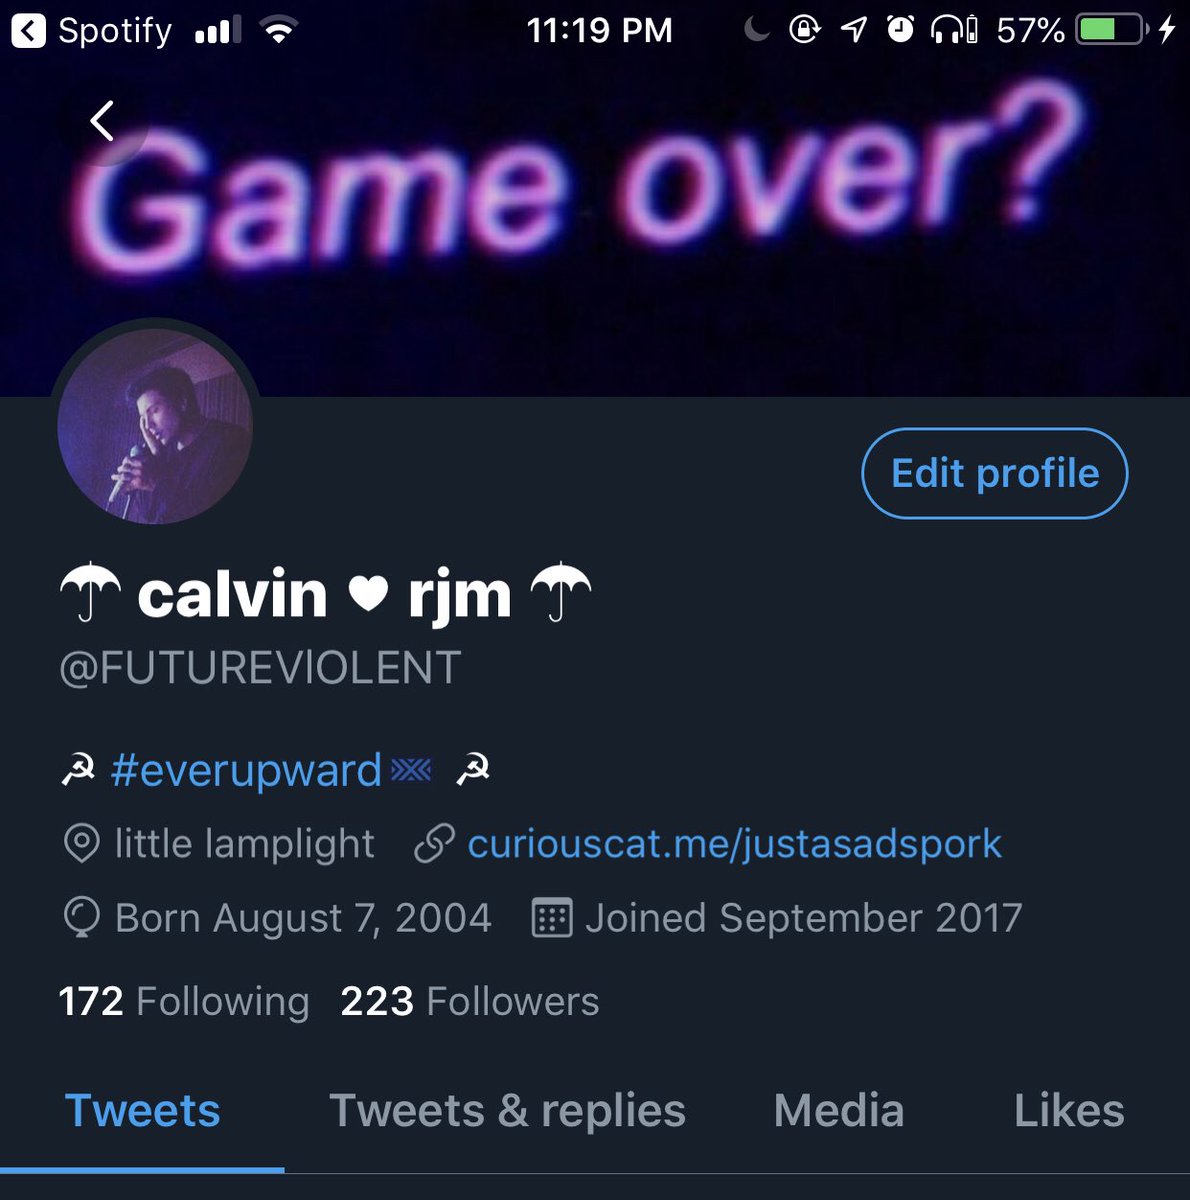 this pfp has the same energy as slow dancing in the dark dont @ me